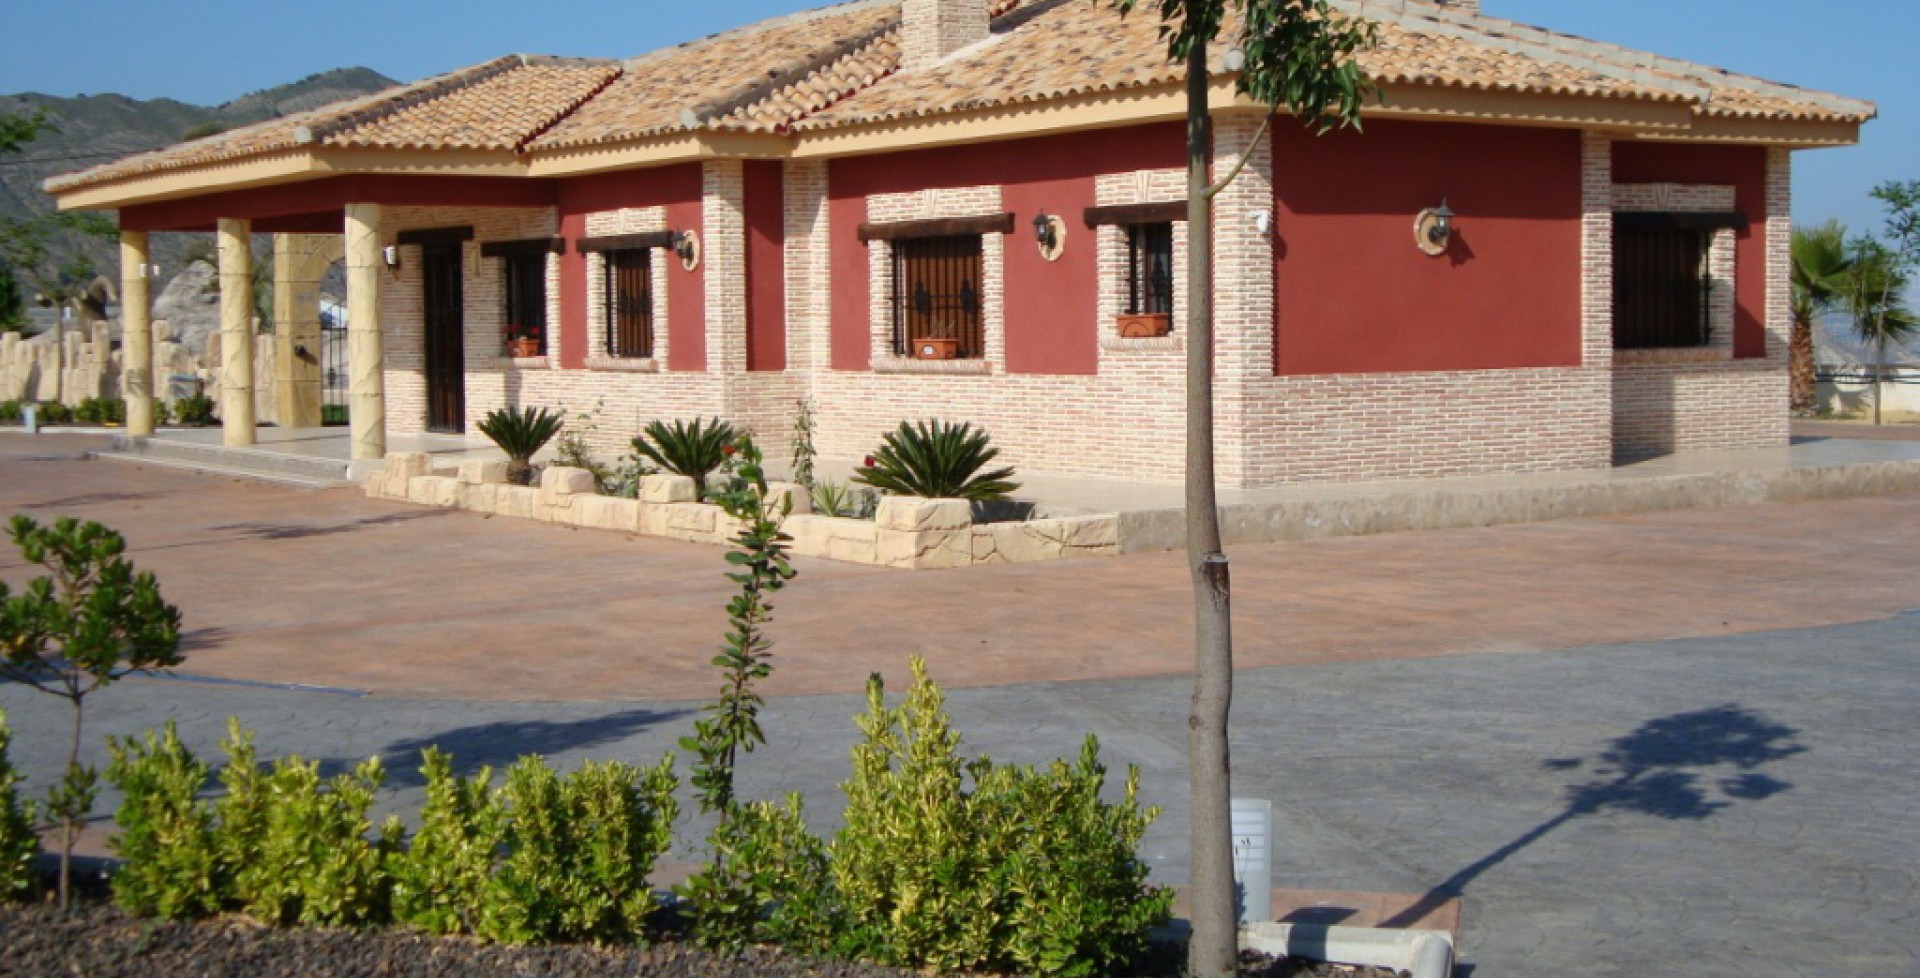 Spectacular country house with amazing pool and jacuzzi, Ojós, Murcia, Spain